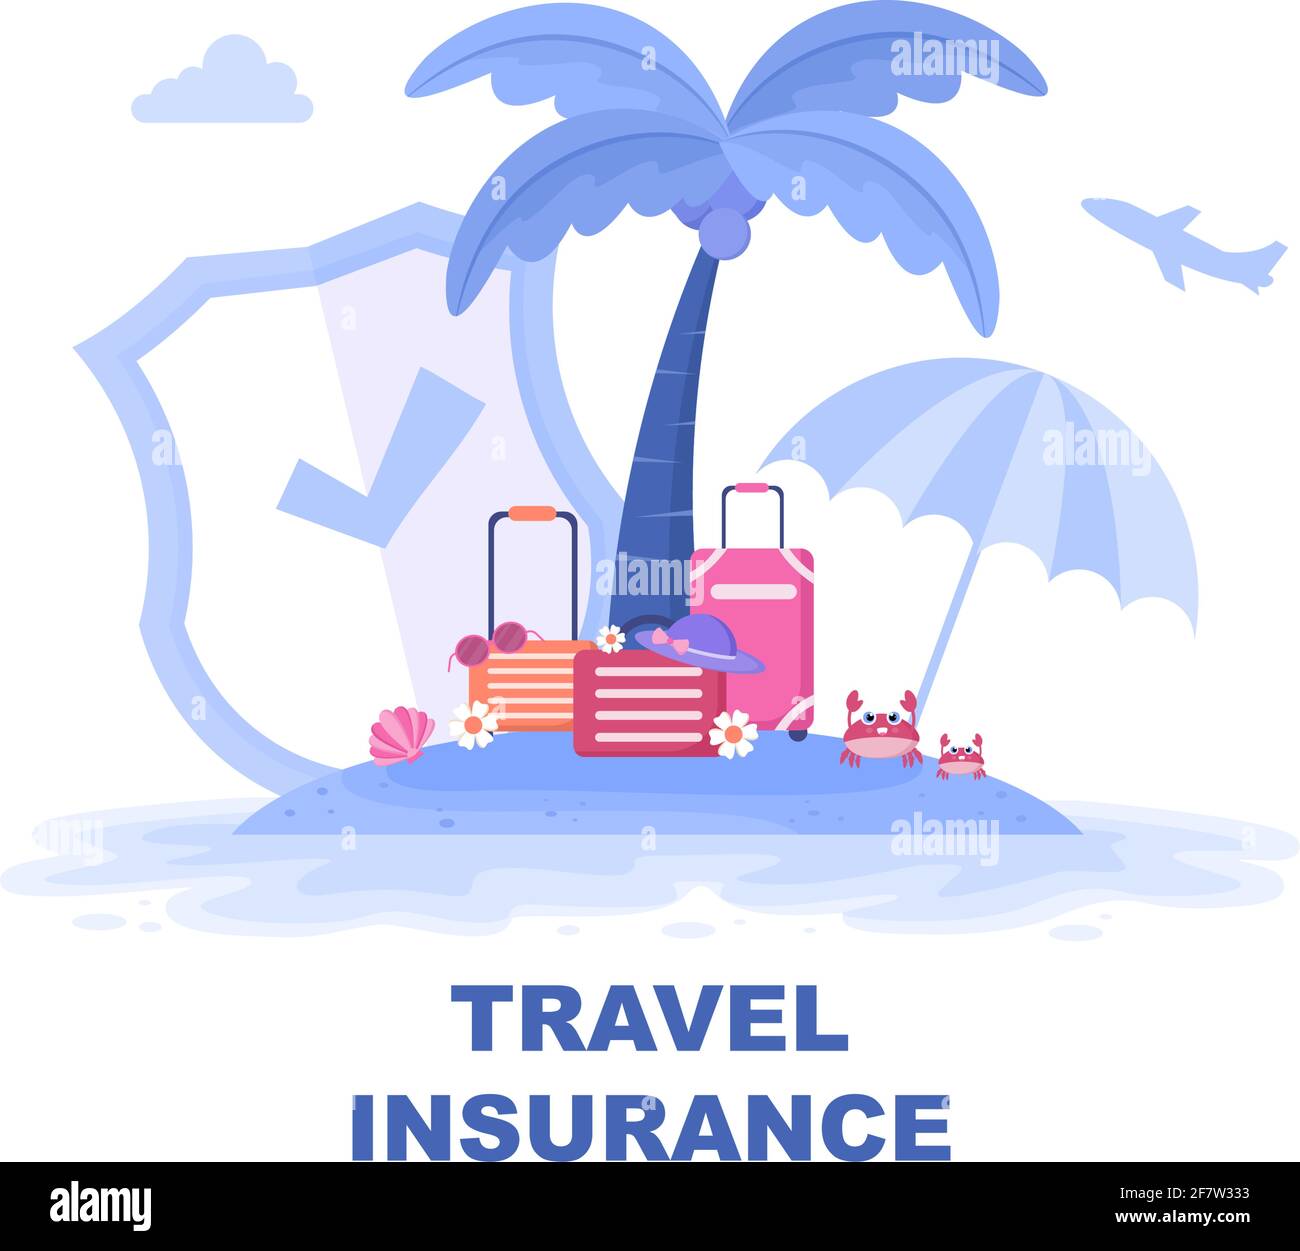 Travel and Tour Insurance Concept for Accidents, Protect Health, Emergency Risks While On Vacation. Vector Flat Design Illustration Stock Vector